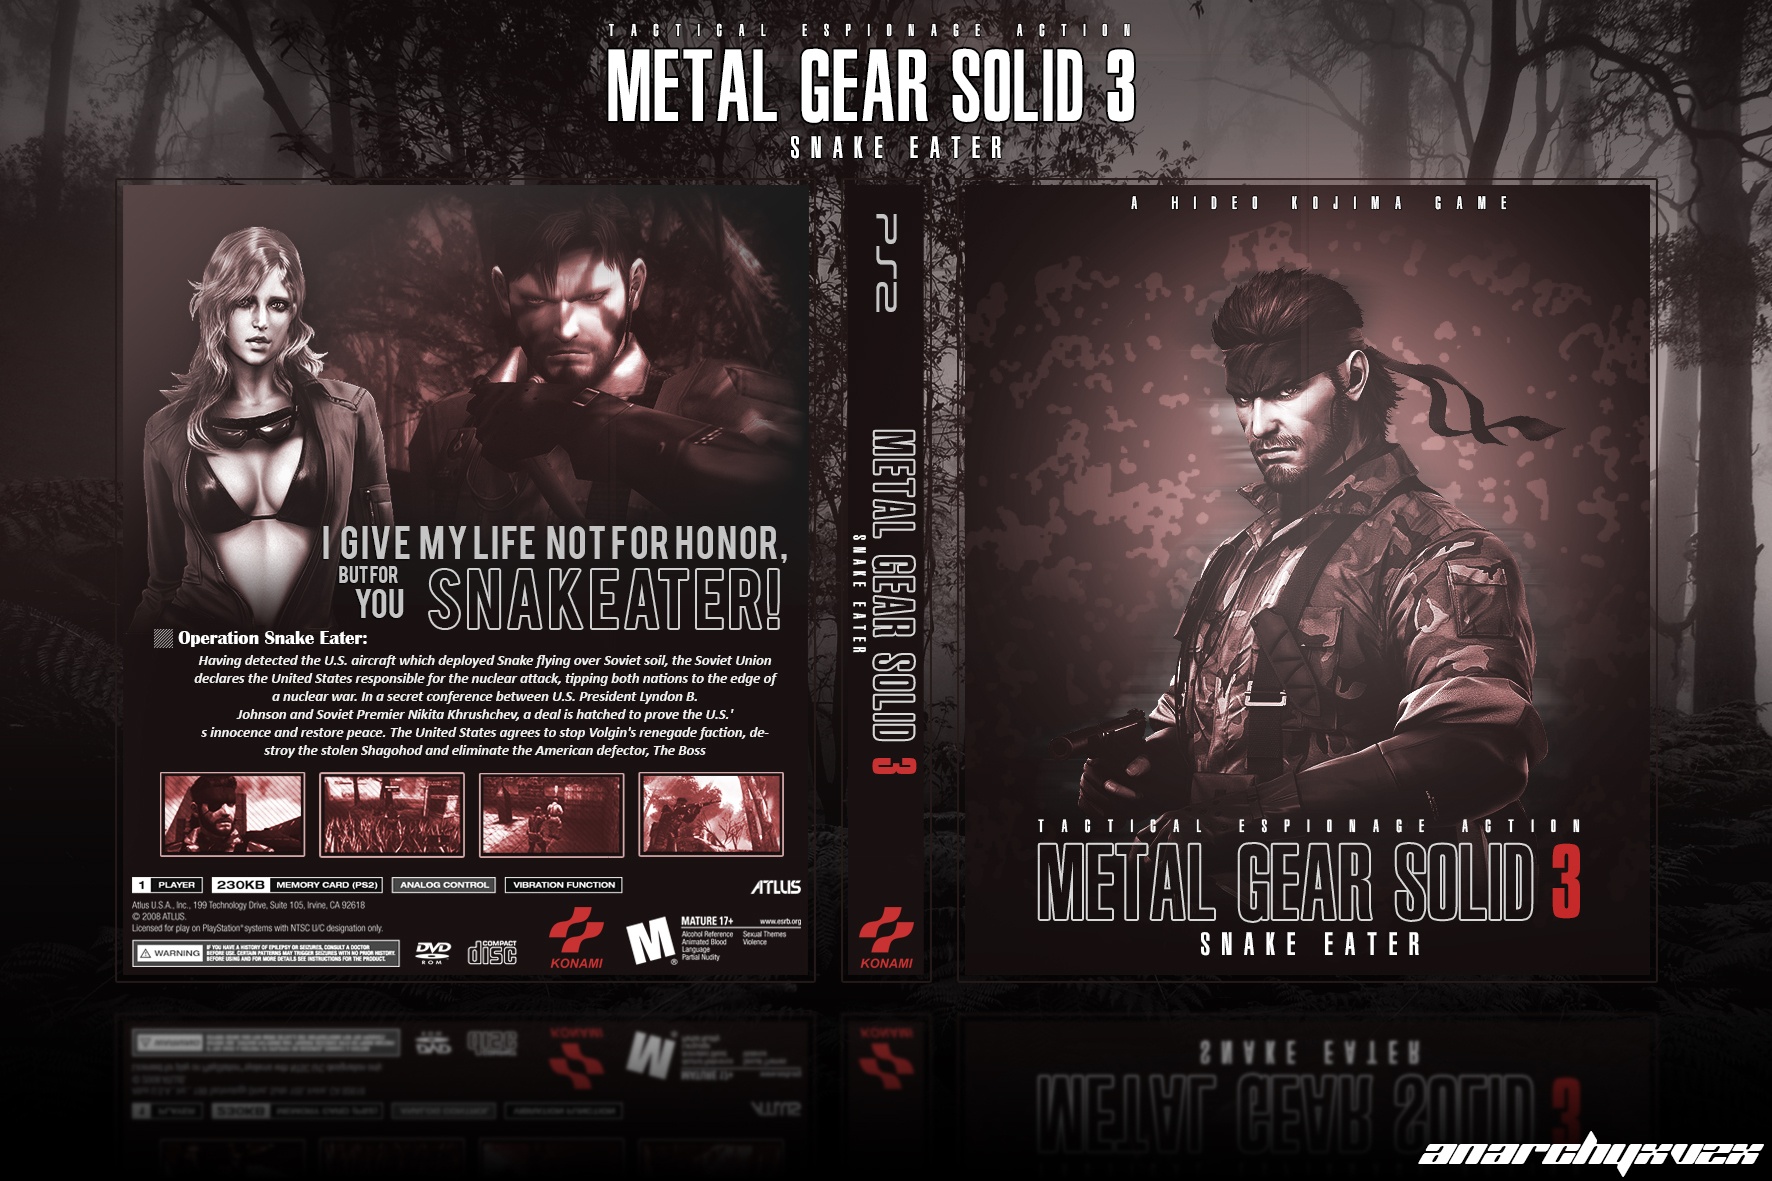 METAL GEAR SOLID 3 - Snake Eater box cover